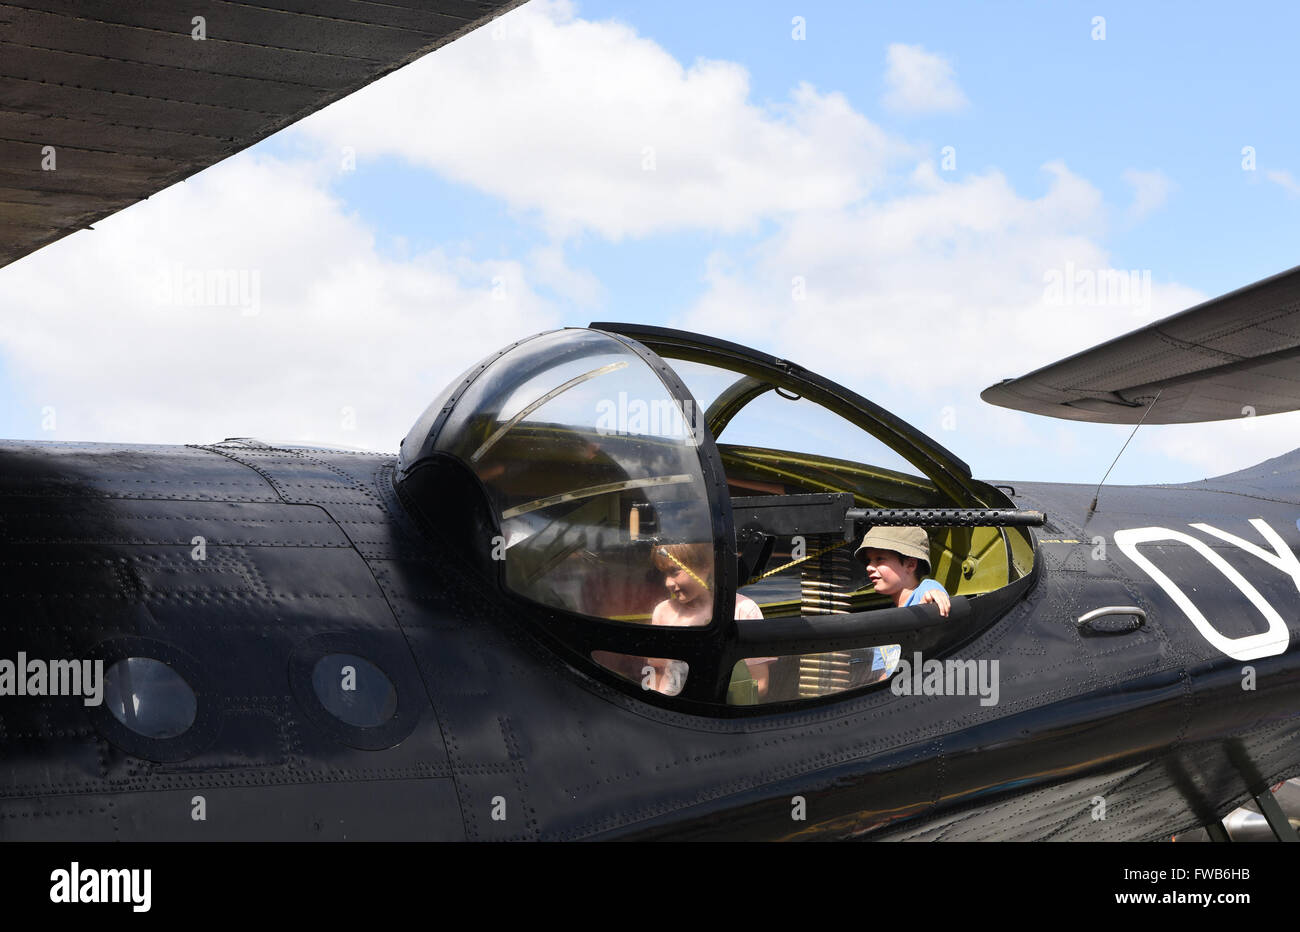 Canberra, Australia. 3rd Apr, 2016. Two children visit in the cockpit of a Royal Australian Airforce aircraft on display during the Canberra Airport Open Day in Canberra, Australia, April 3, 2016. Credit:  Justin Qian/Xinhua/Alamy Live News Stock Photo